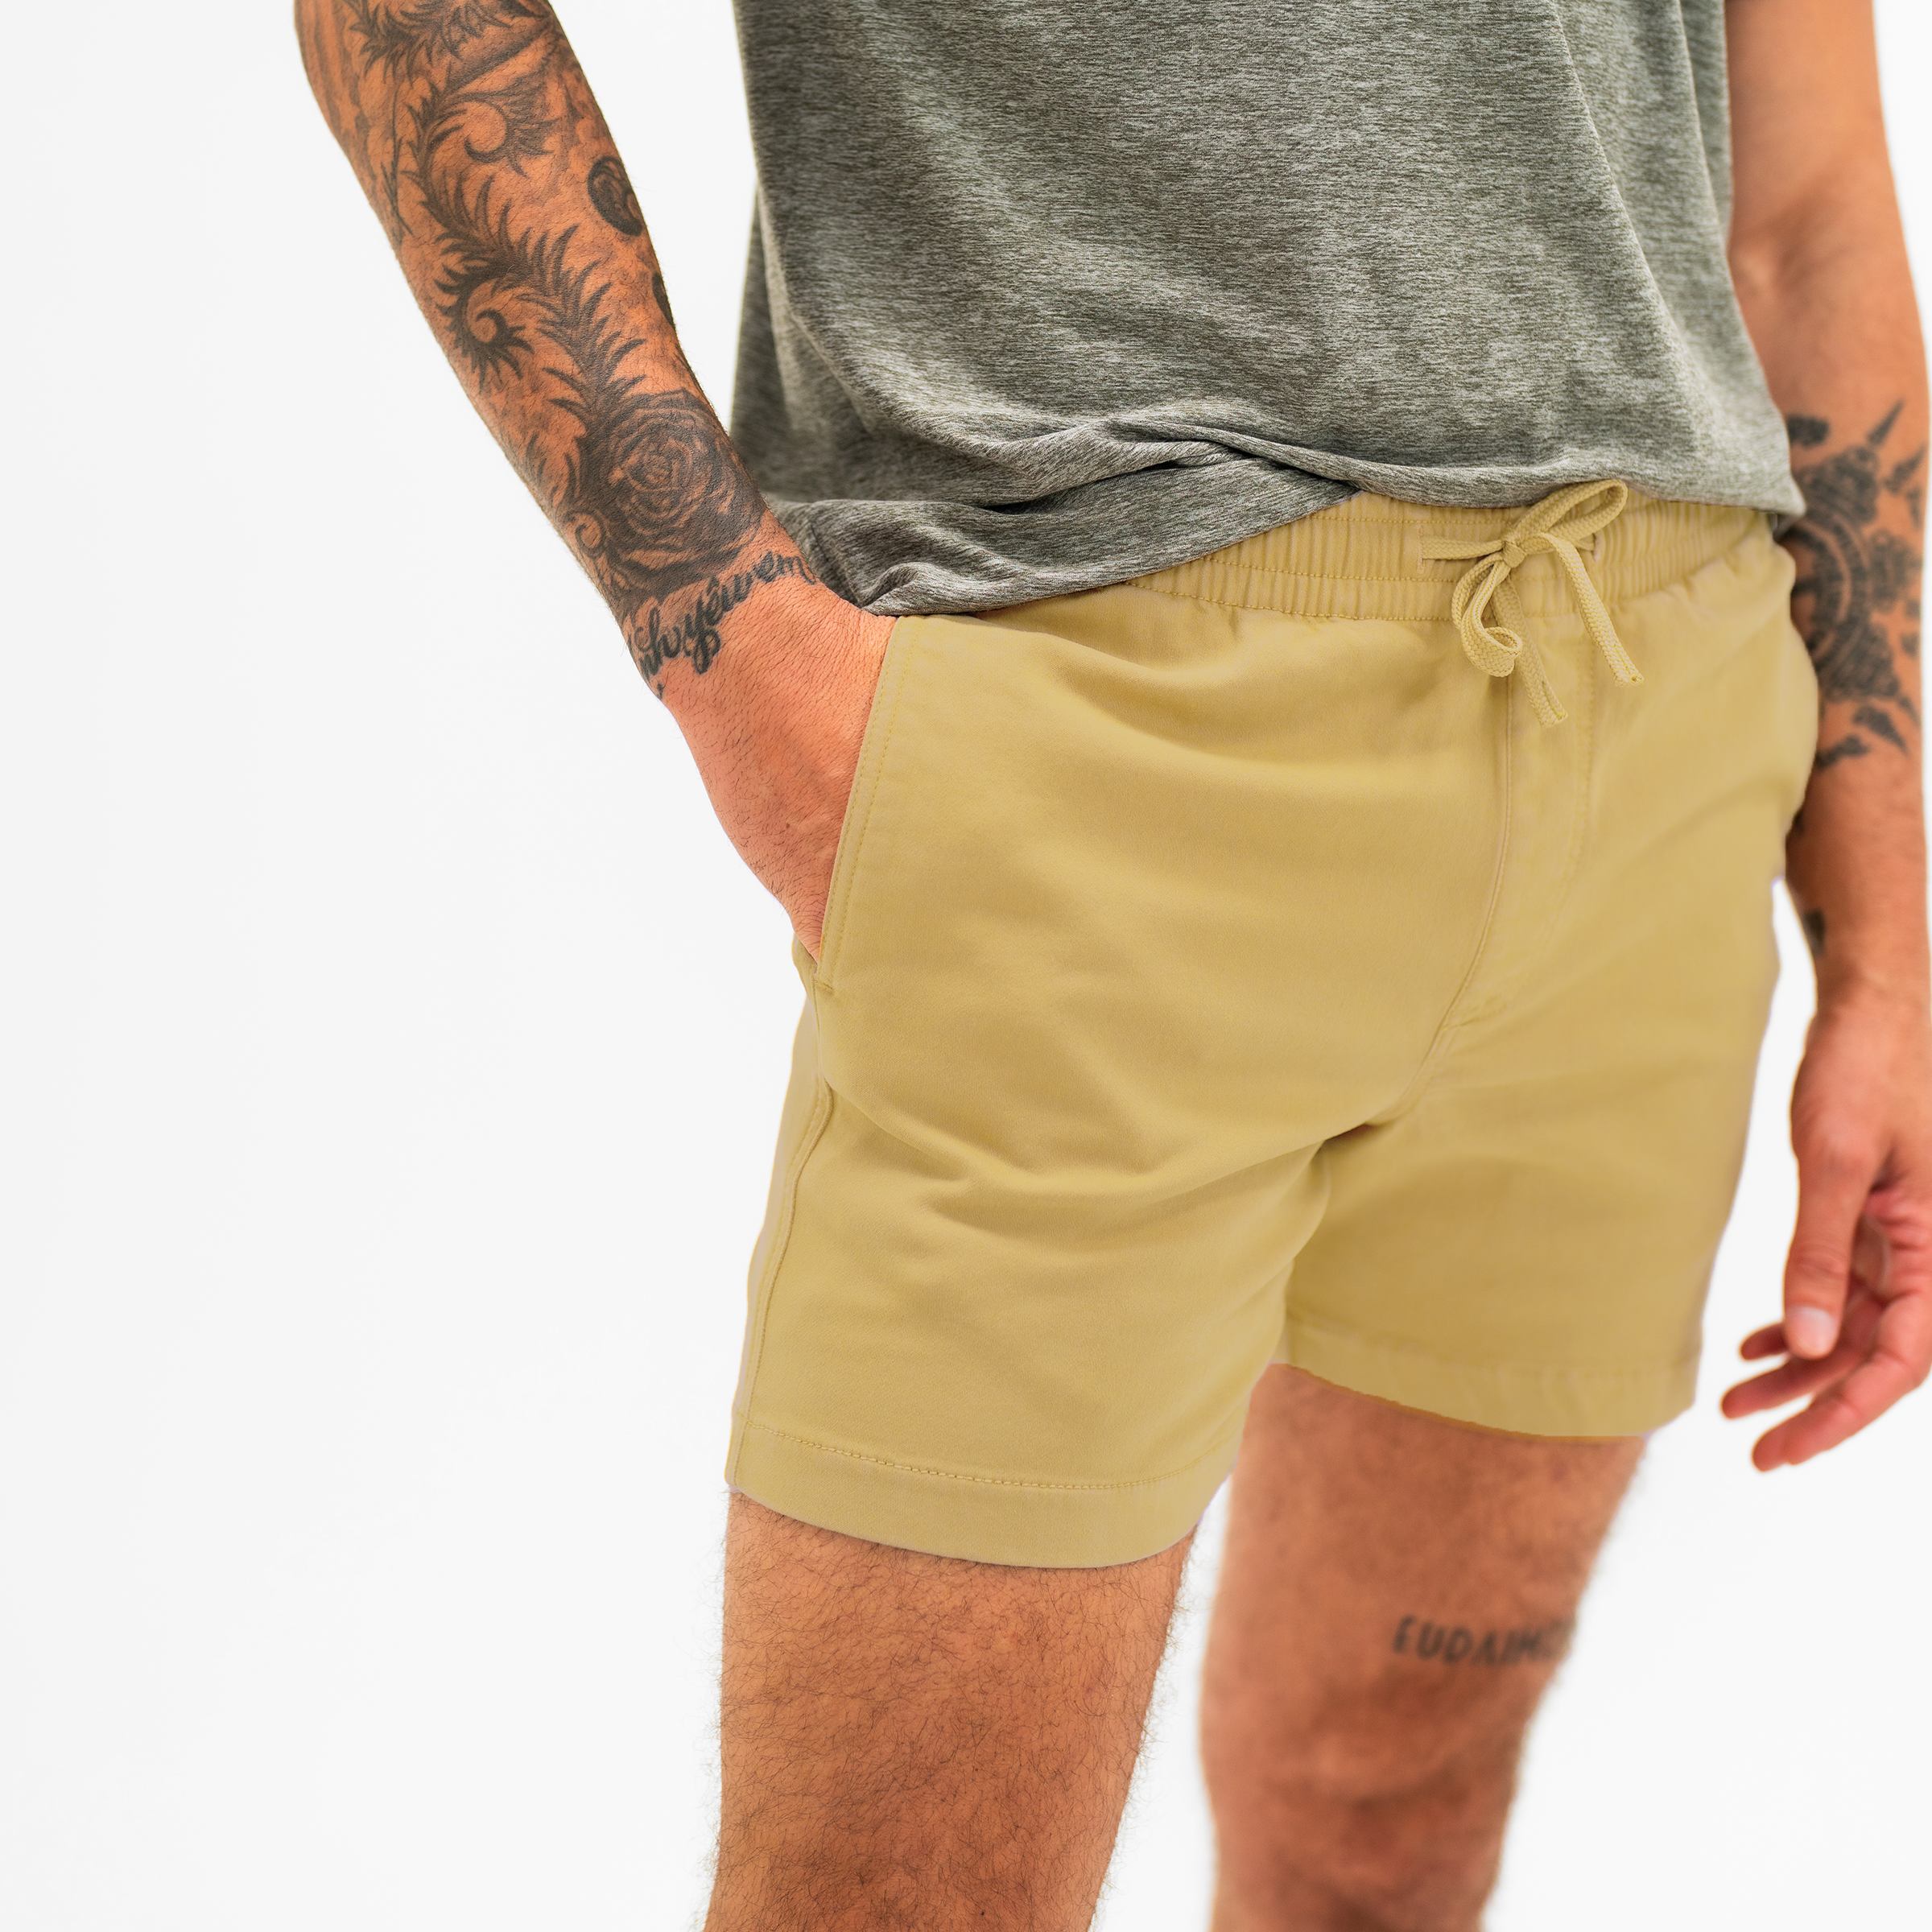 Alto Short 5.5" inseam in Khaki side on model with elastic waistband, fabric drawstring, faux fly, and two front side seam pockets